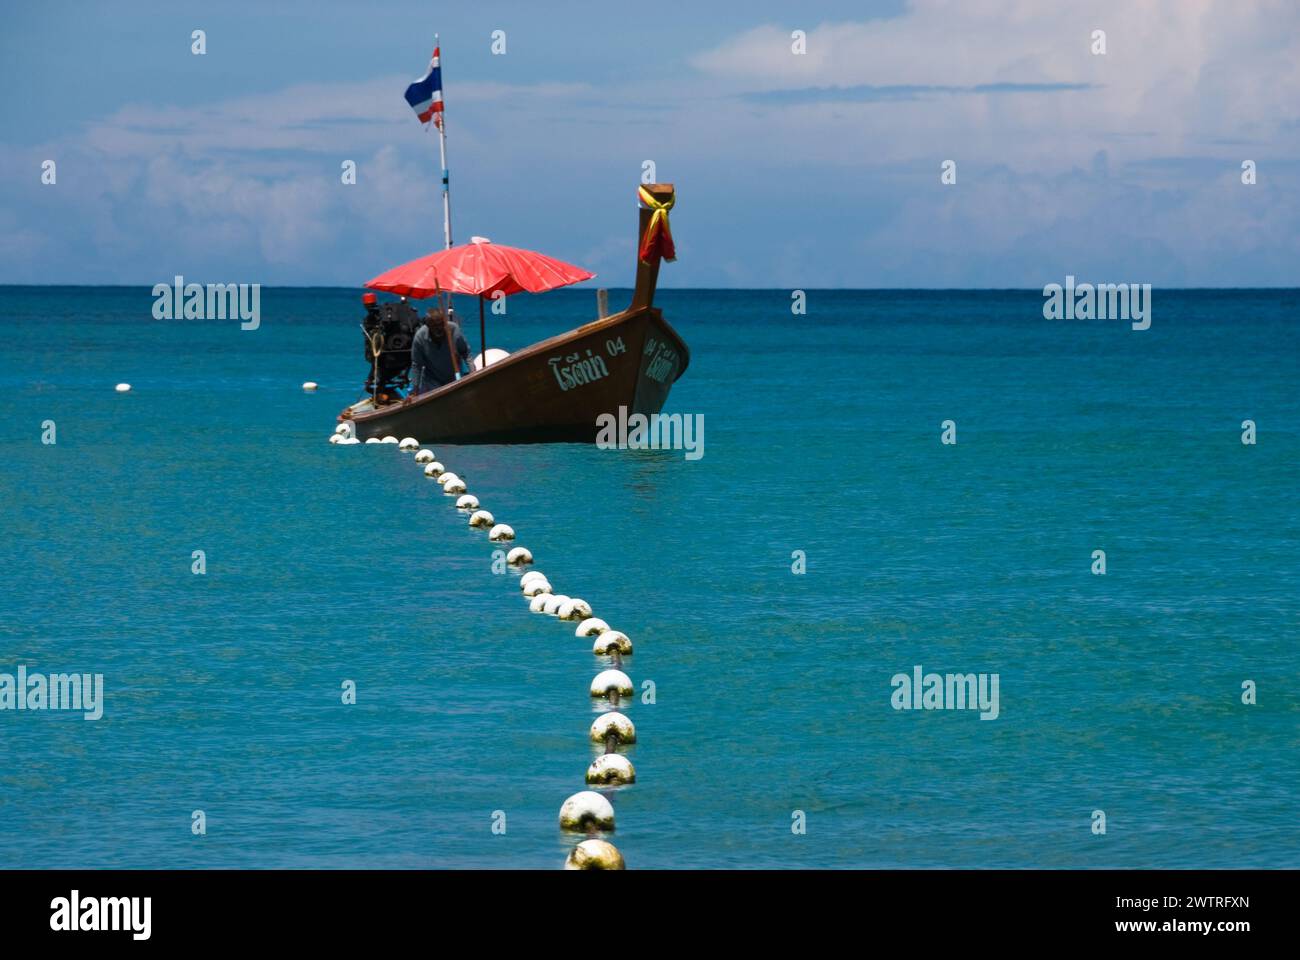 Boat at sea with rope around its hull Stock Photo